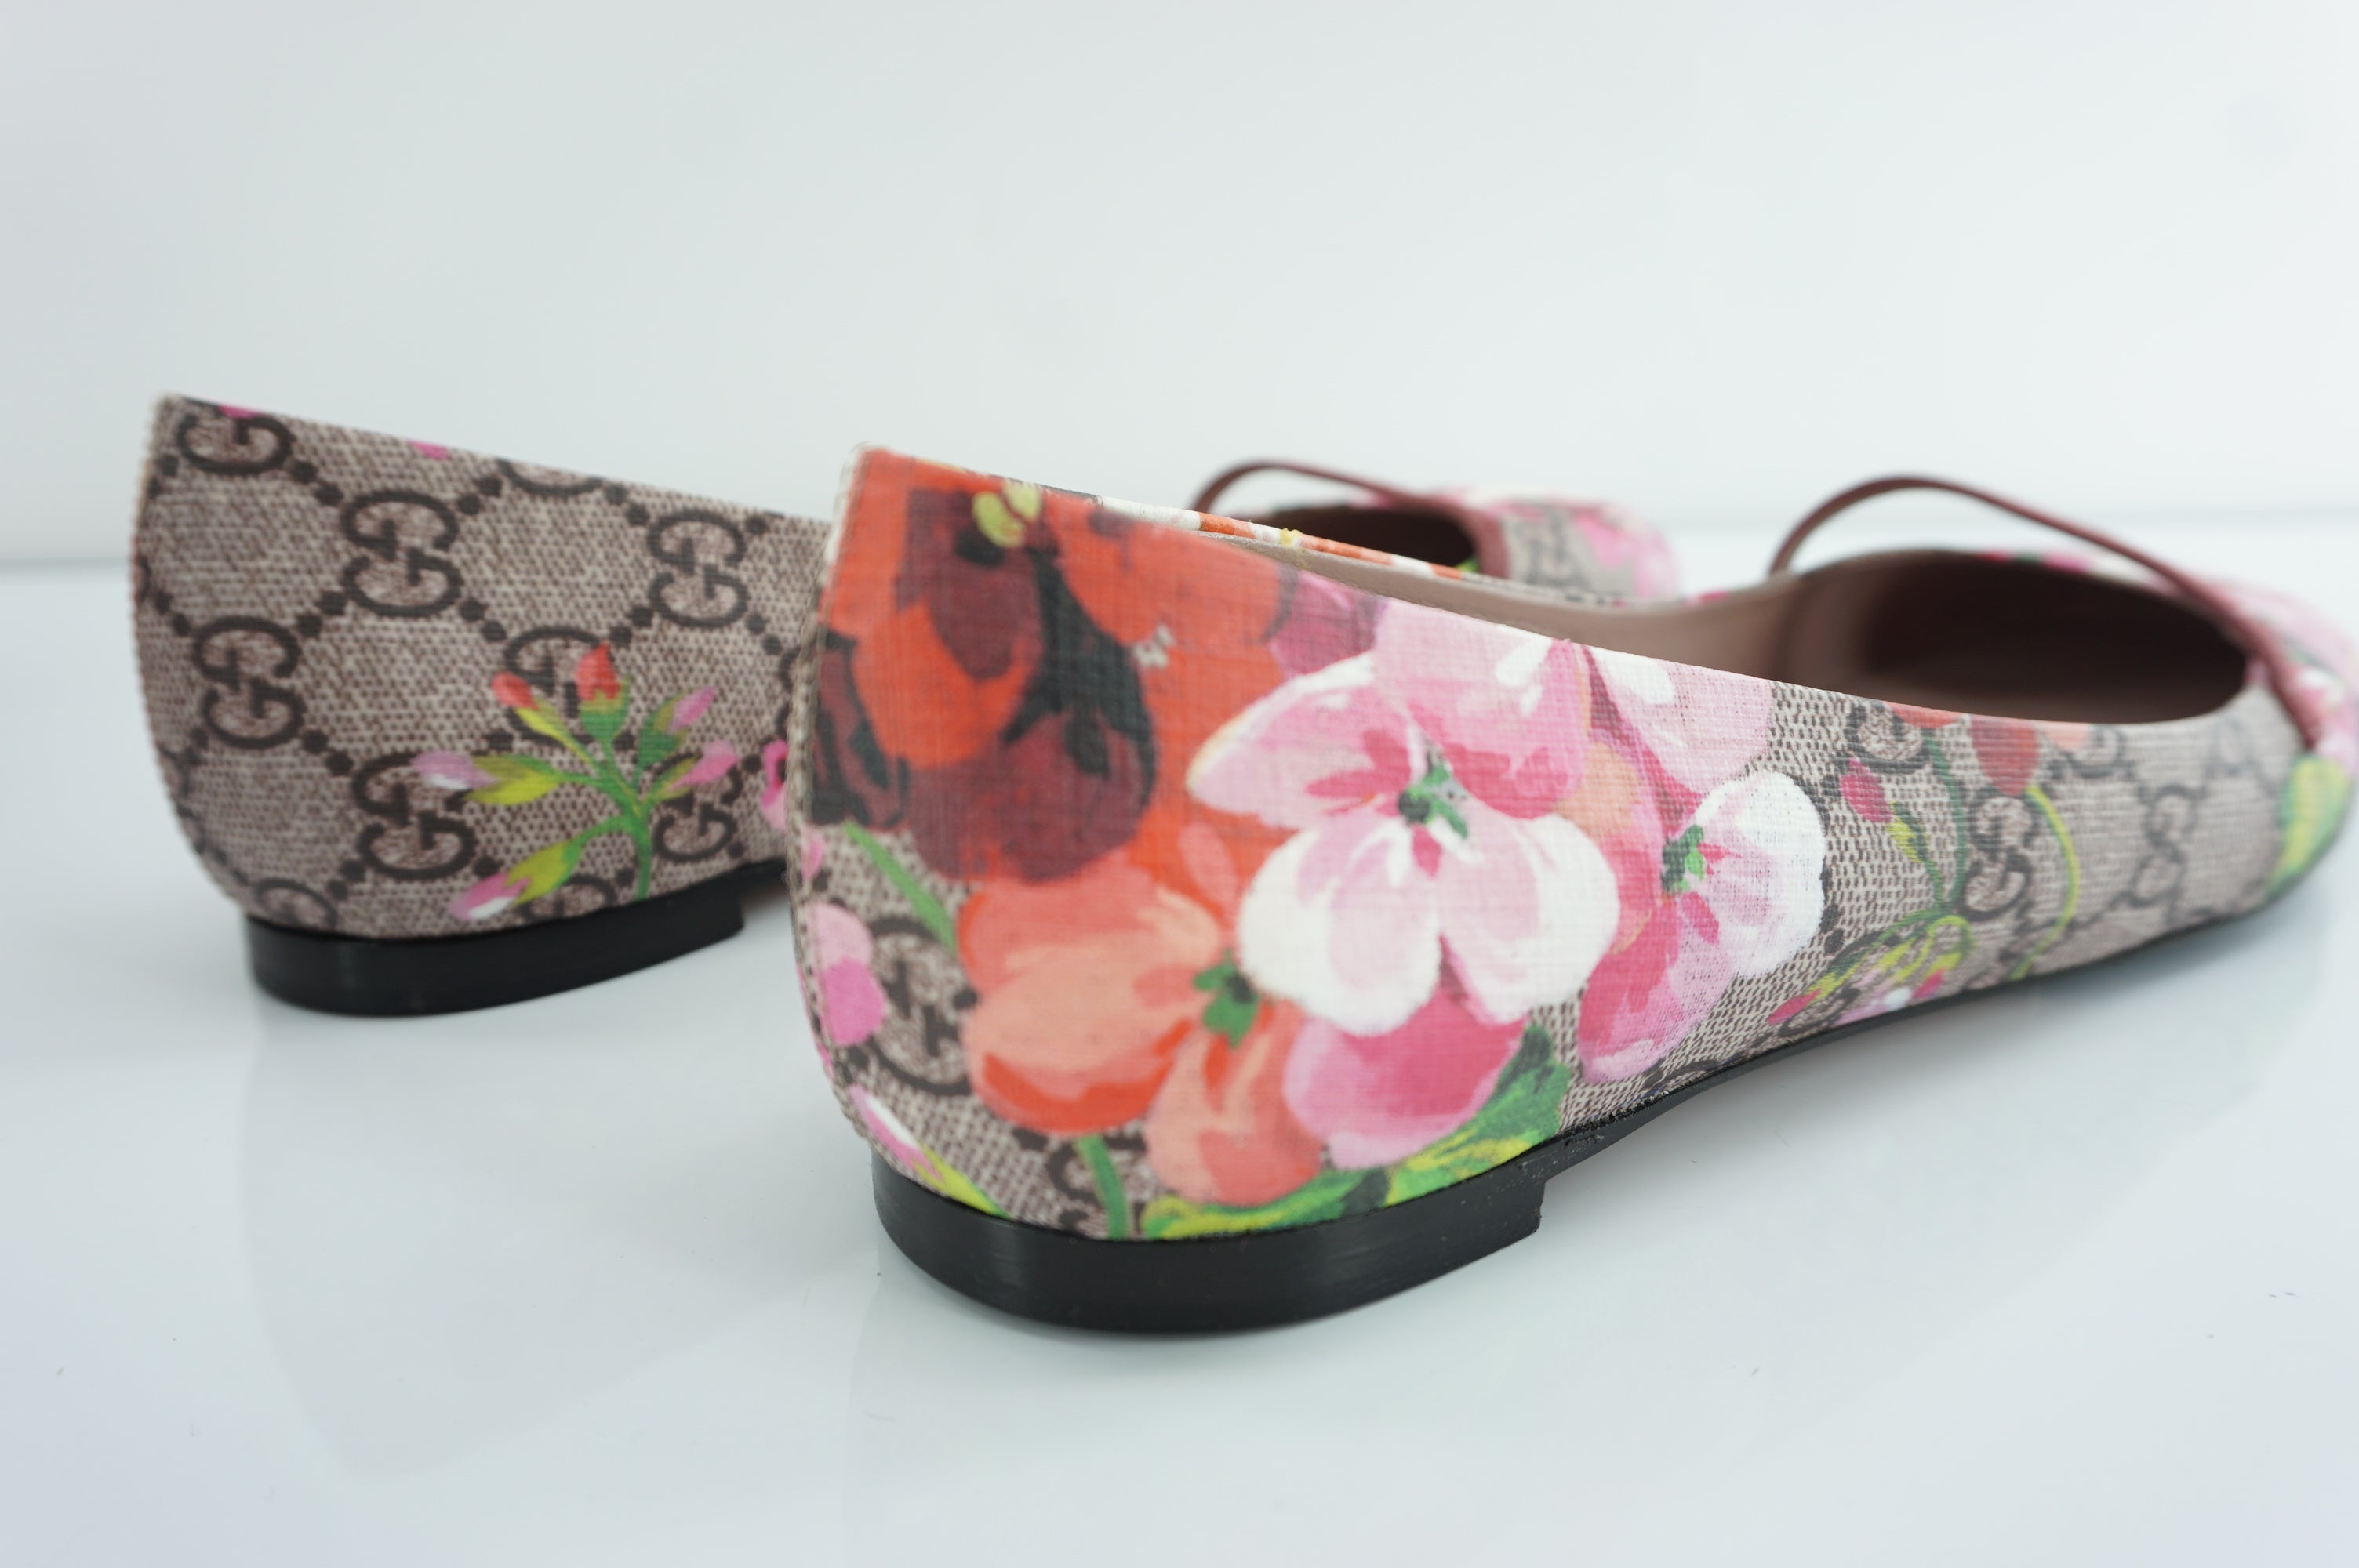 Gucci Bloom GG Supreme 411038 Mary Jane Slip On Ballet Flats Size 37.5 New